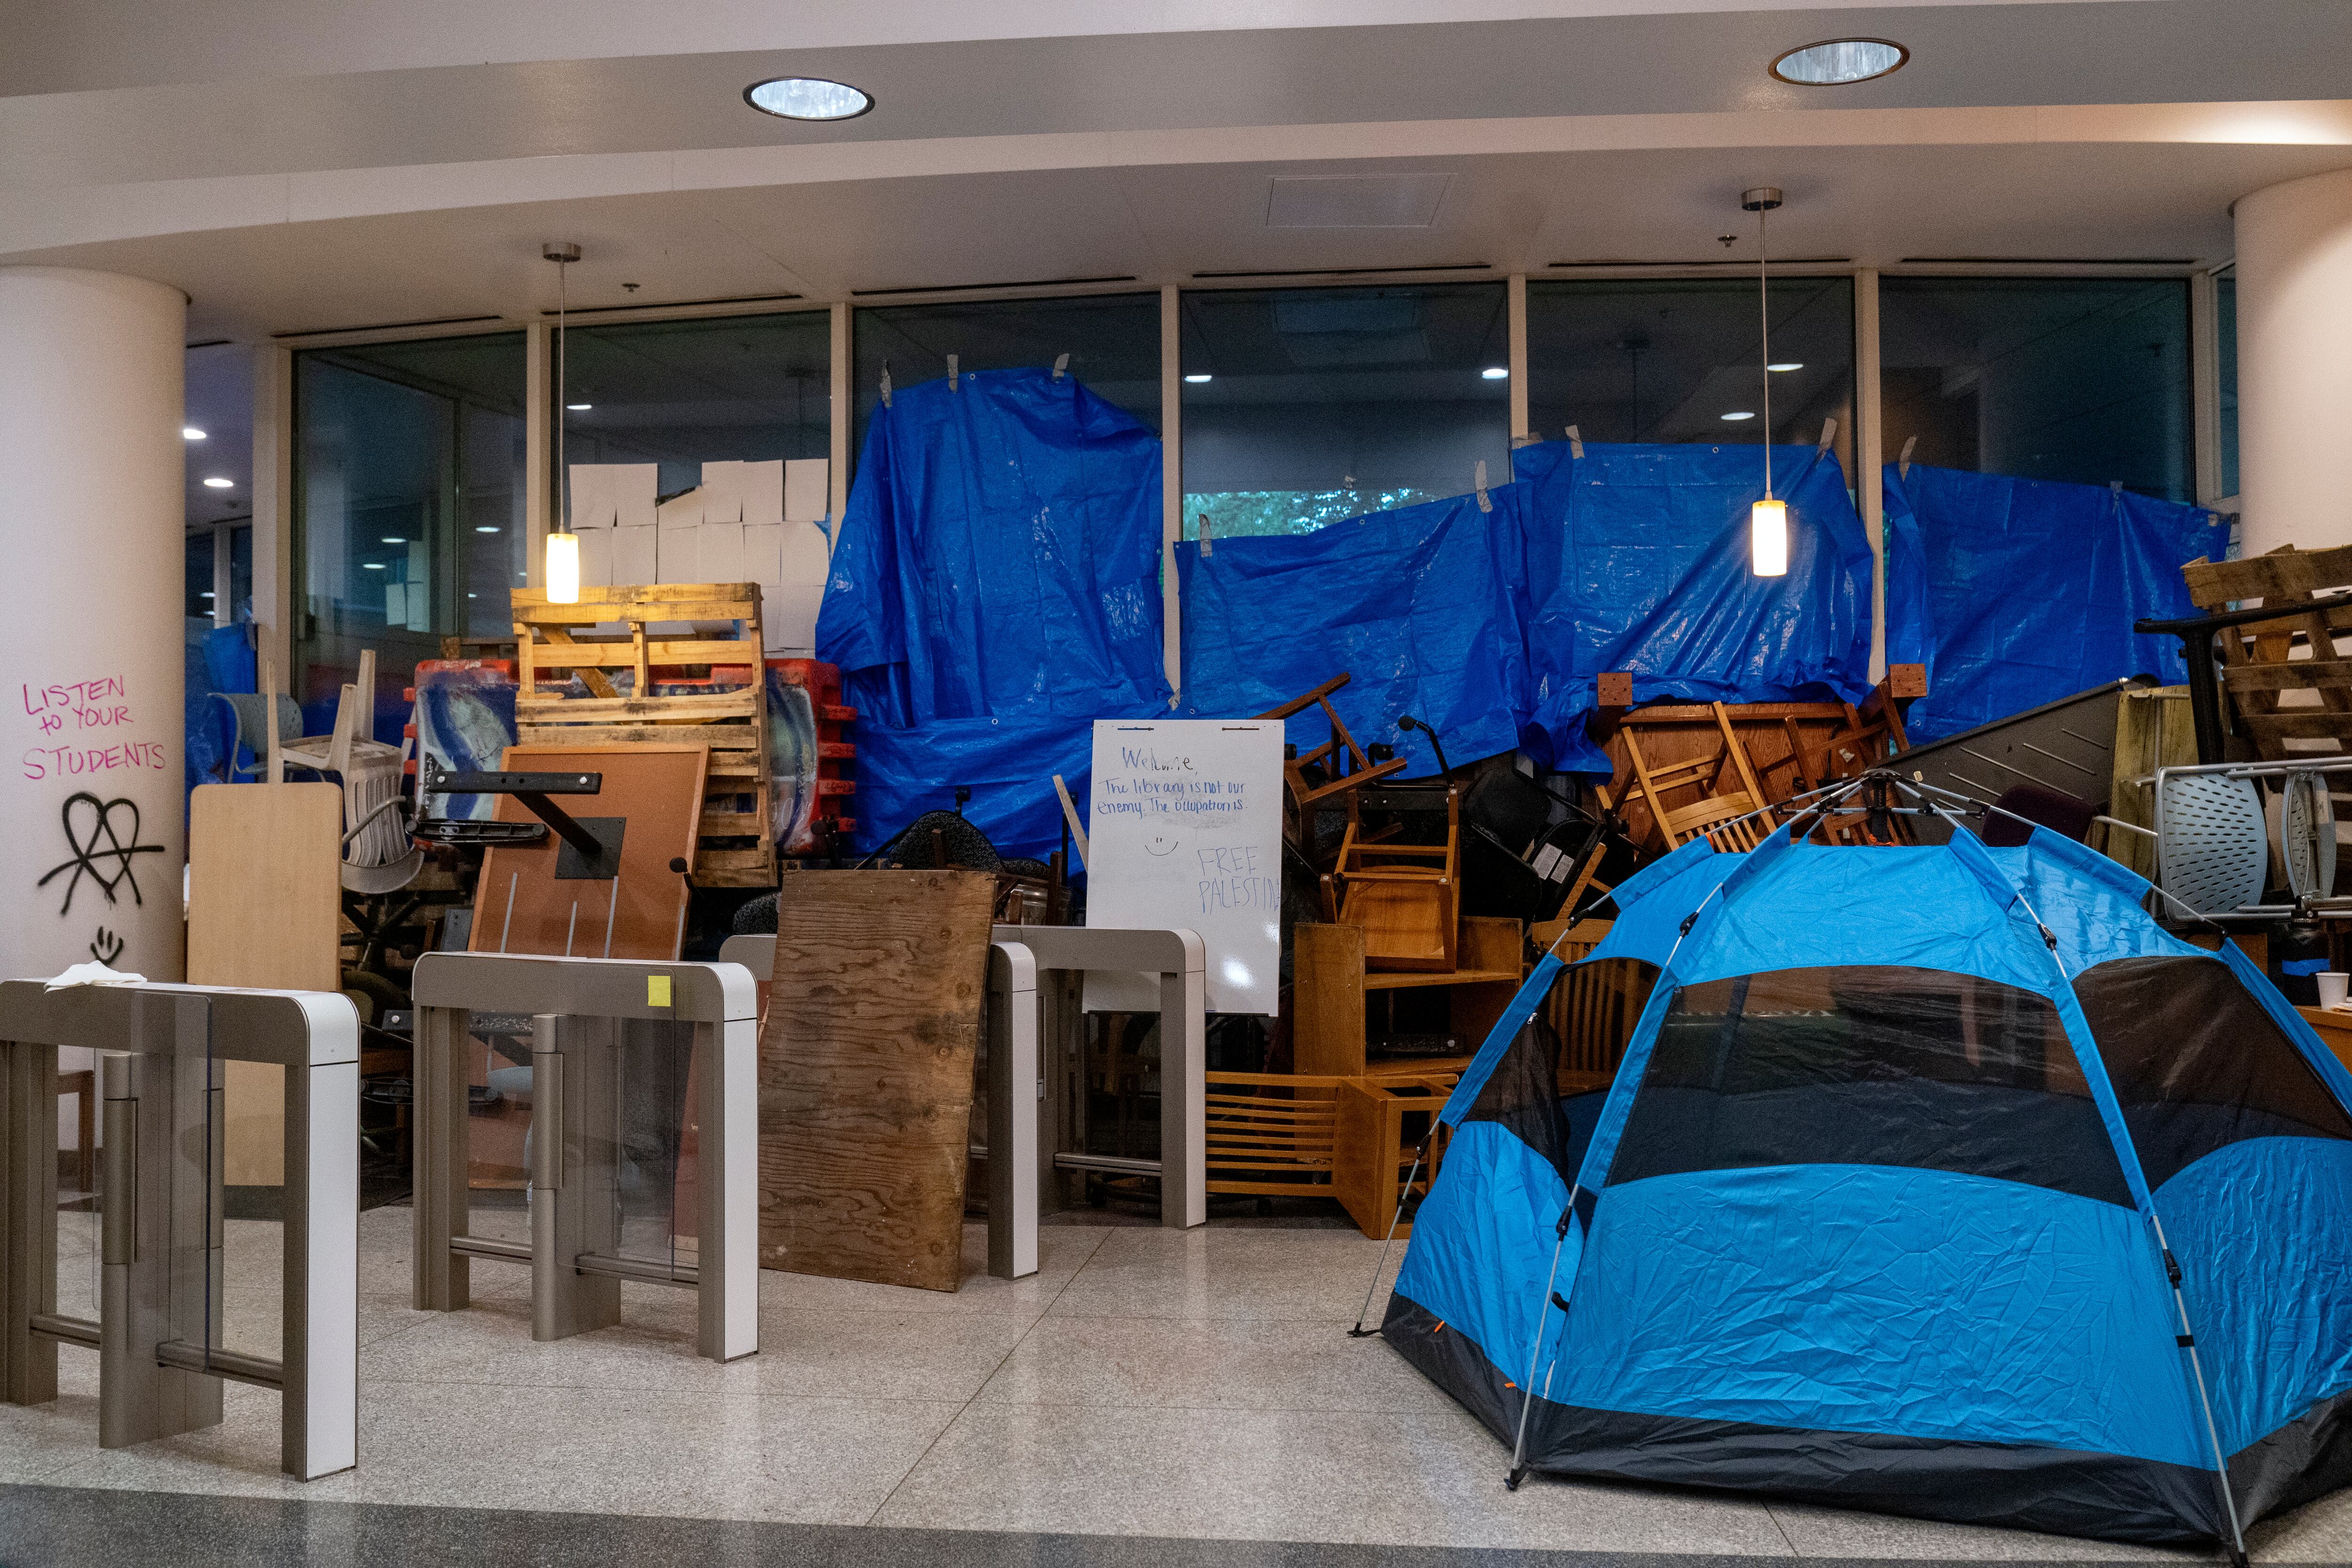 Tarps and blockades fortify the entrance to the occupied Branford Price Millar Library at Portland State University.